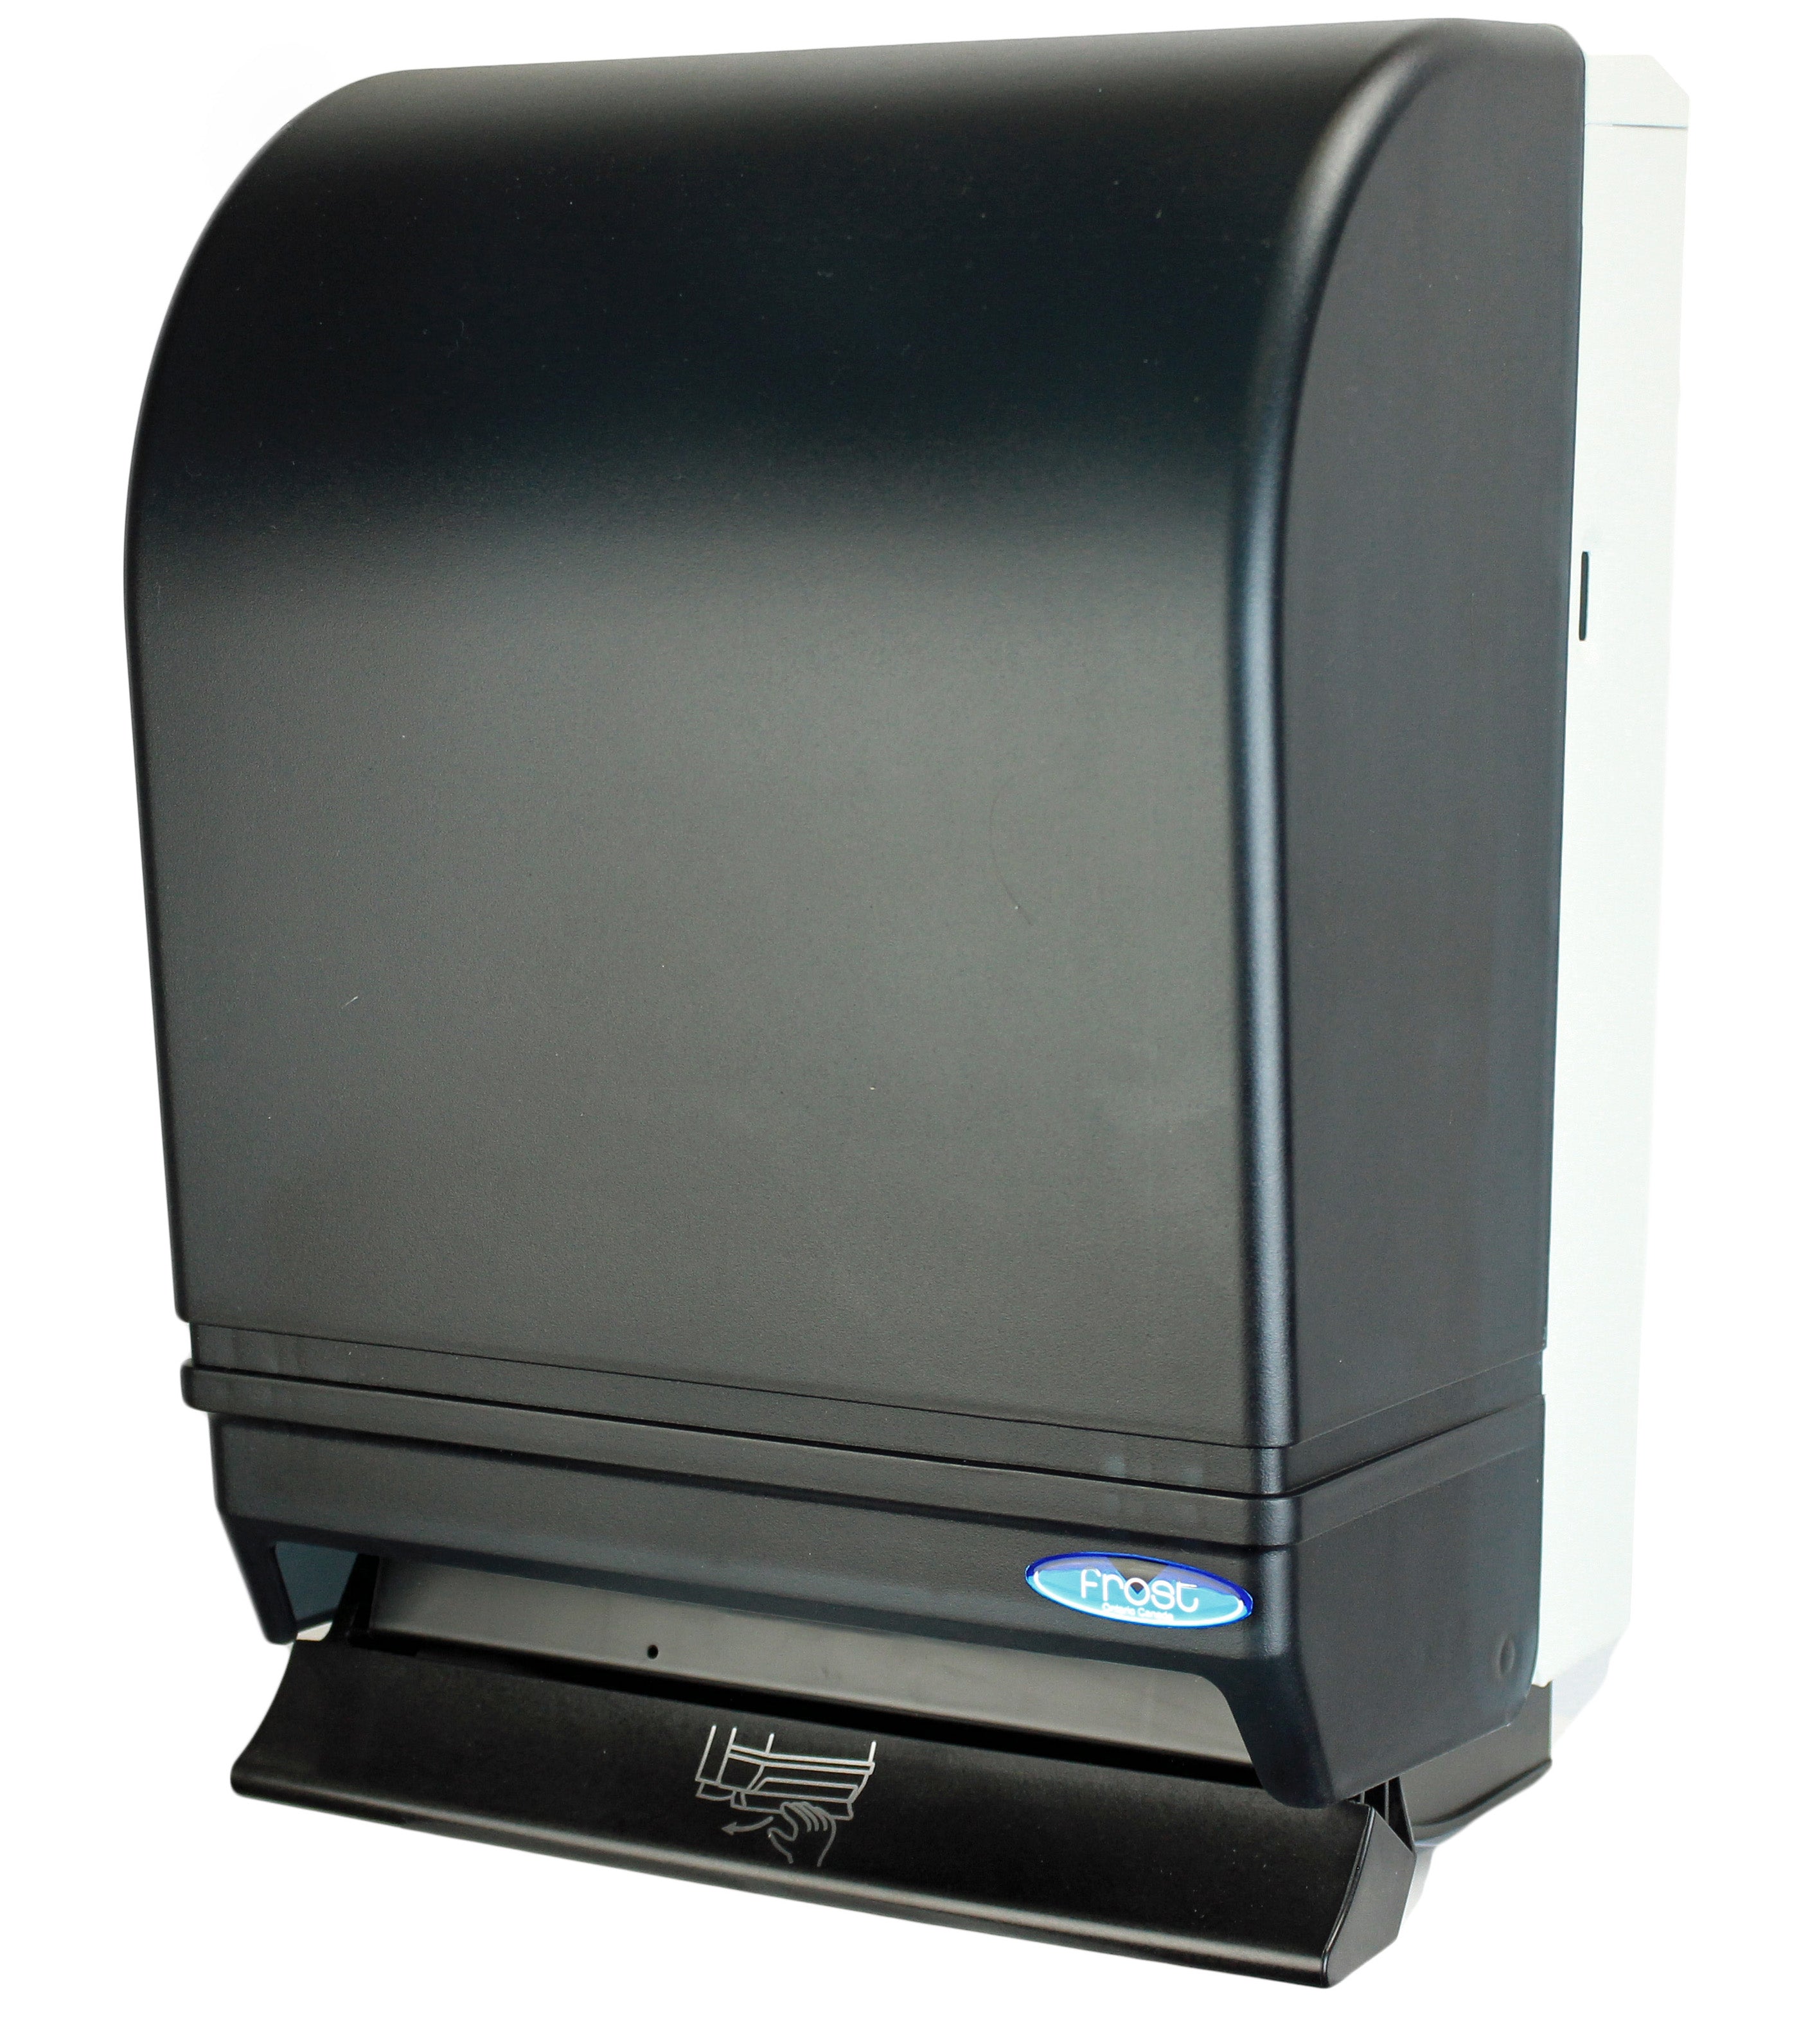 Frost Polycarbonate Push Action Roll Towel Dispenser